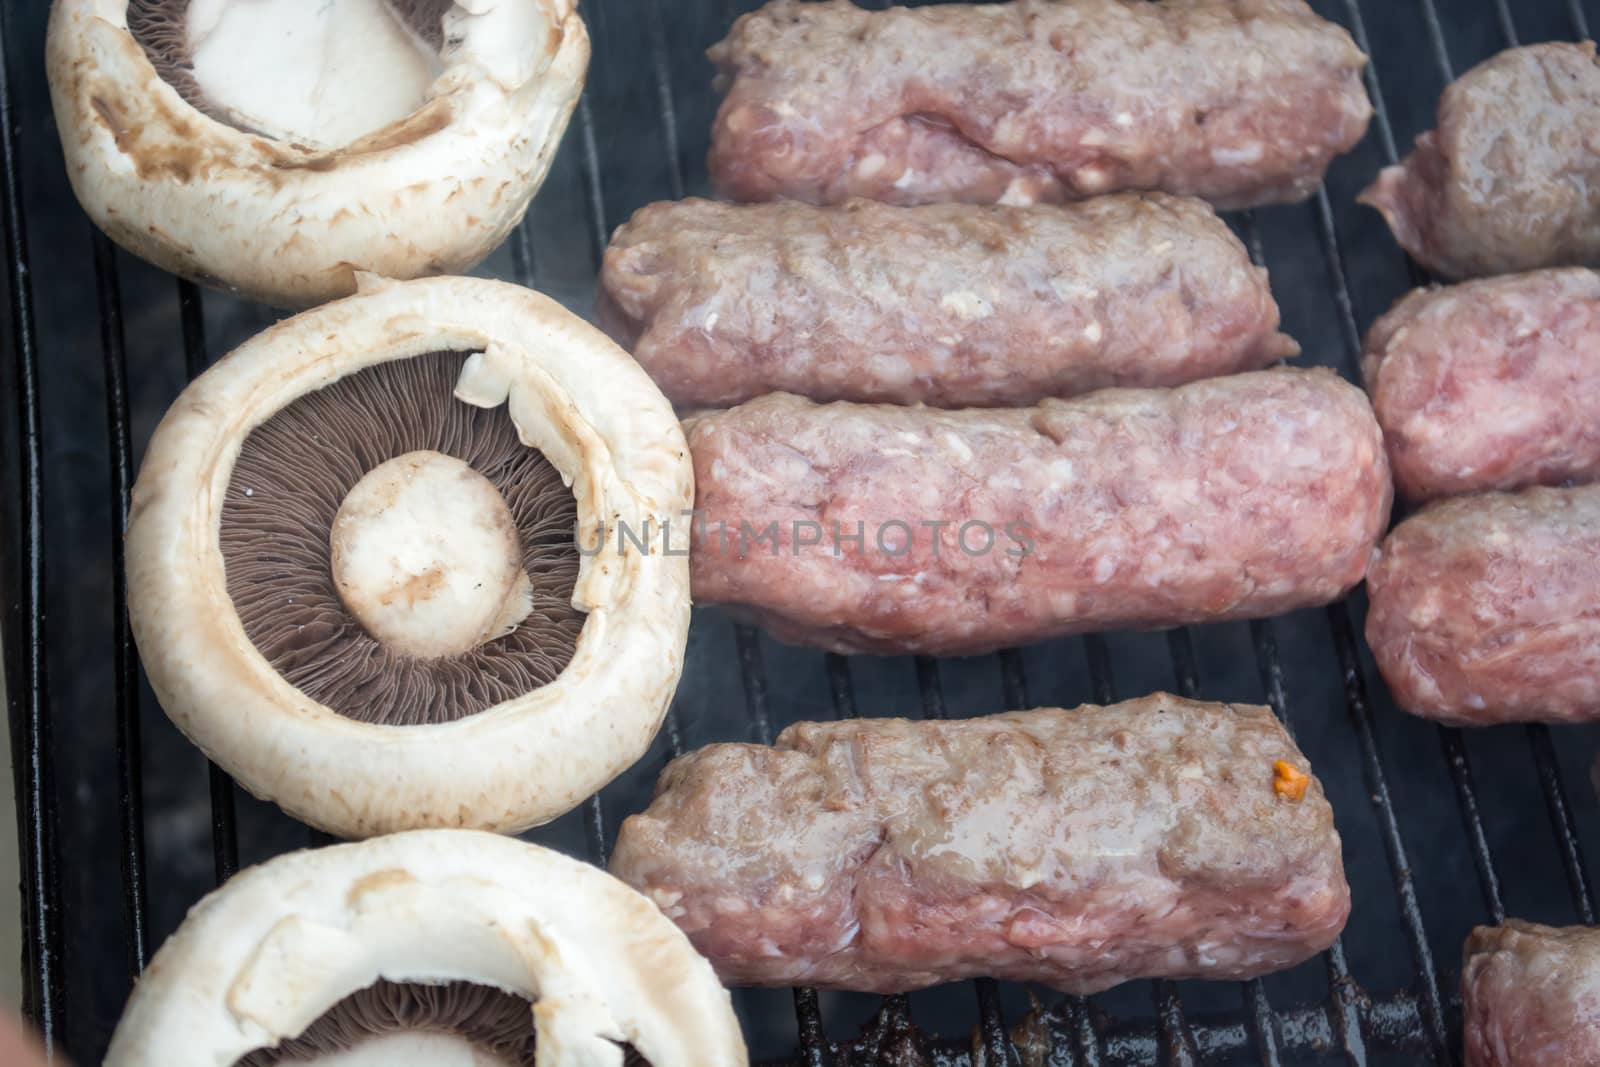 Grilling cevapi and mushrooms. Smoke visible. Upper angle